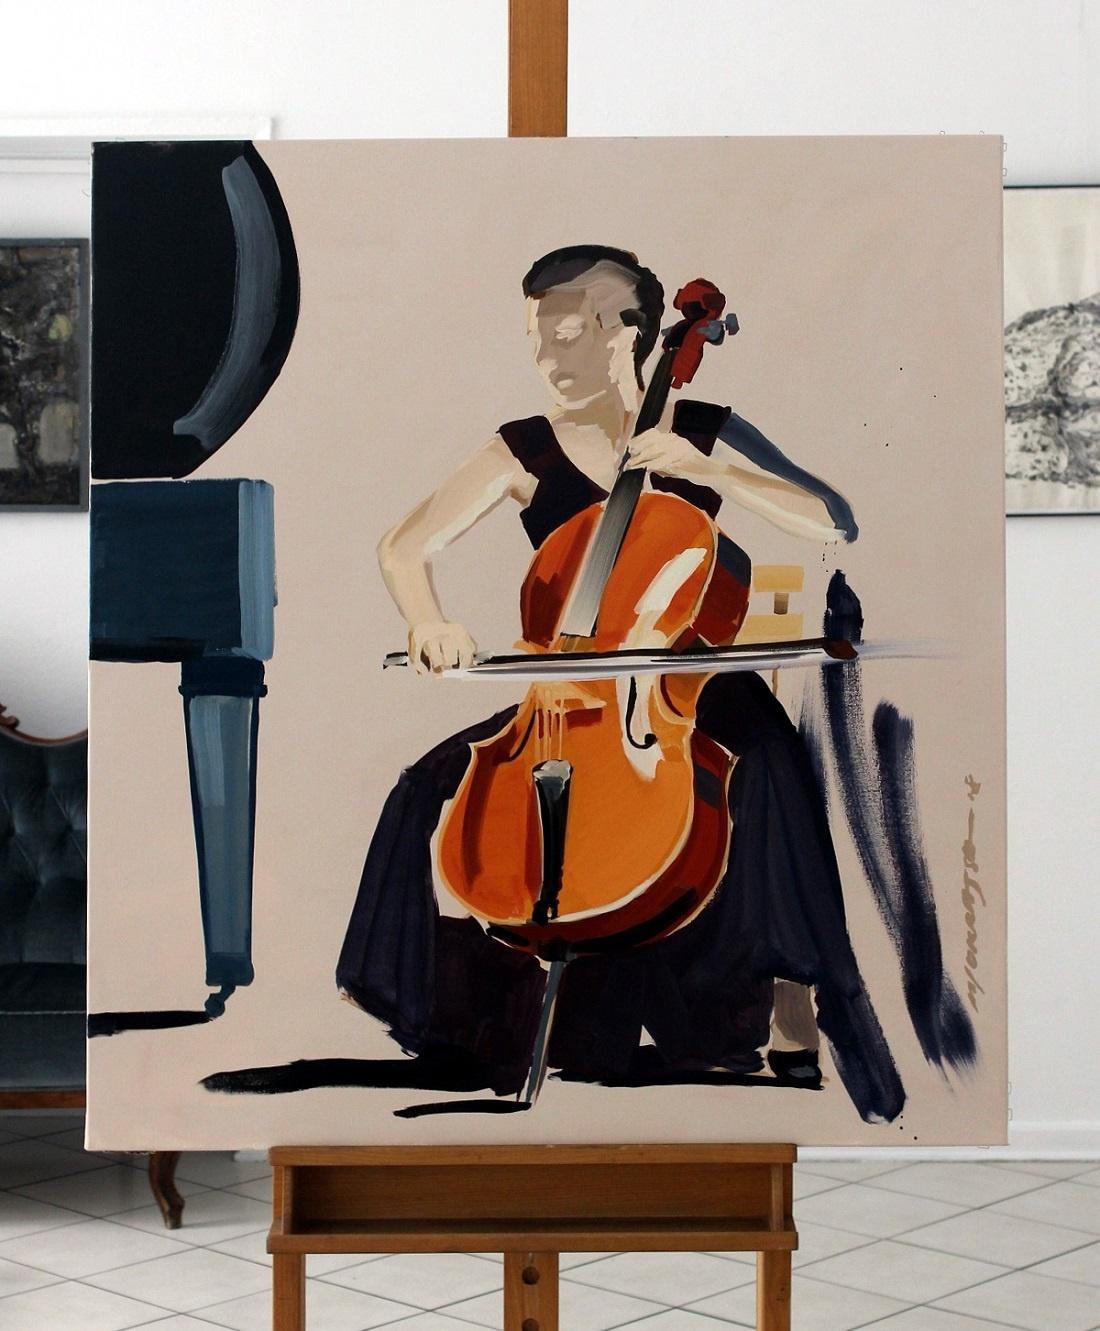 Oil painting depicting a female cellist painted by Marek Okrassa, who was twice awarded with a grant from the Ministry of Culture and Arts and in 1999, the Silver Spur in 2000, the honourable mention of Franciszka Eibisch Foundation in 2004 at the